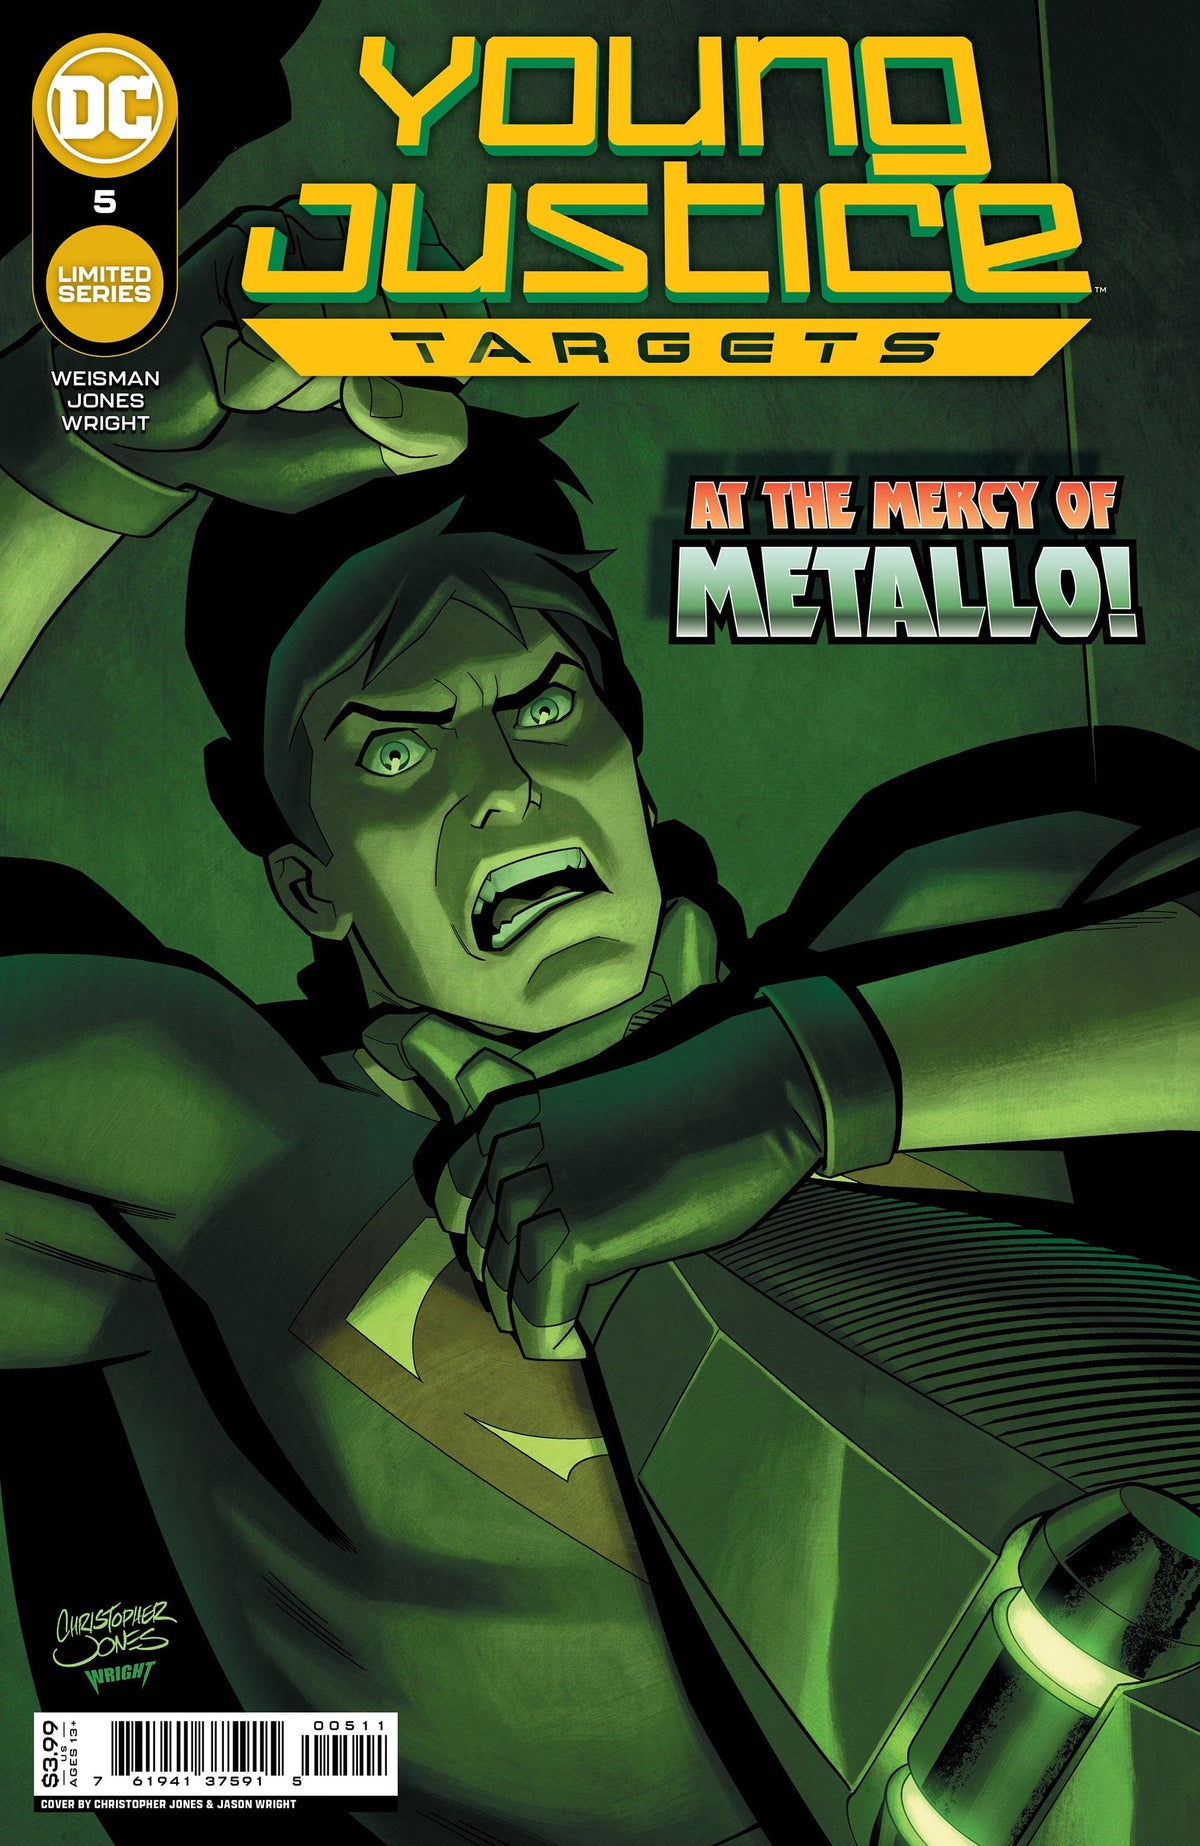 YOUNG JUSTICE TARGETS #5 (OF 6) CVR A CHRISTOPHER JONES - Third Eye